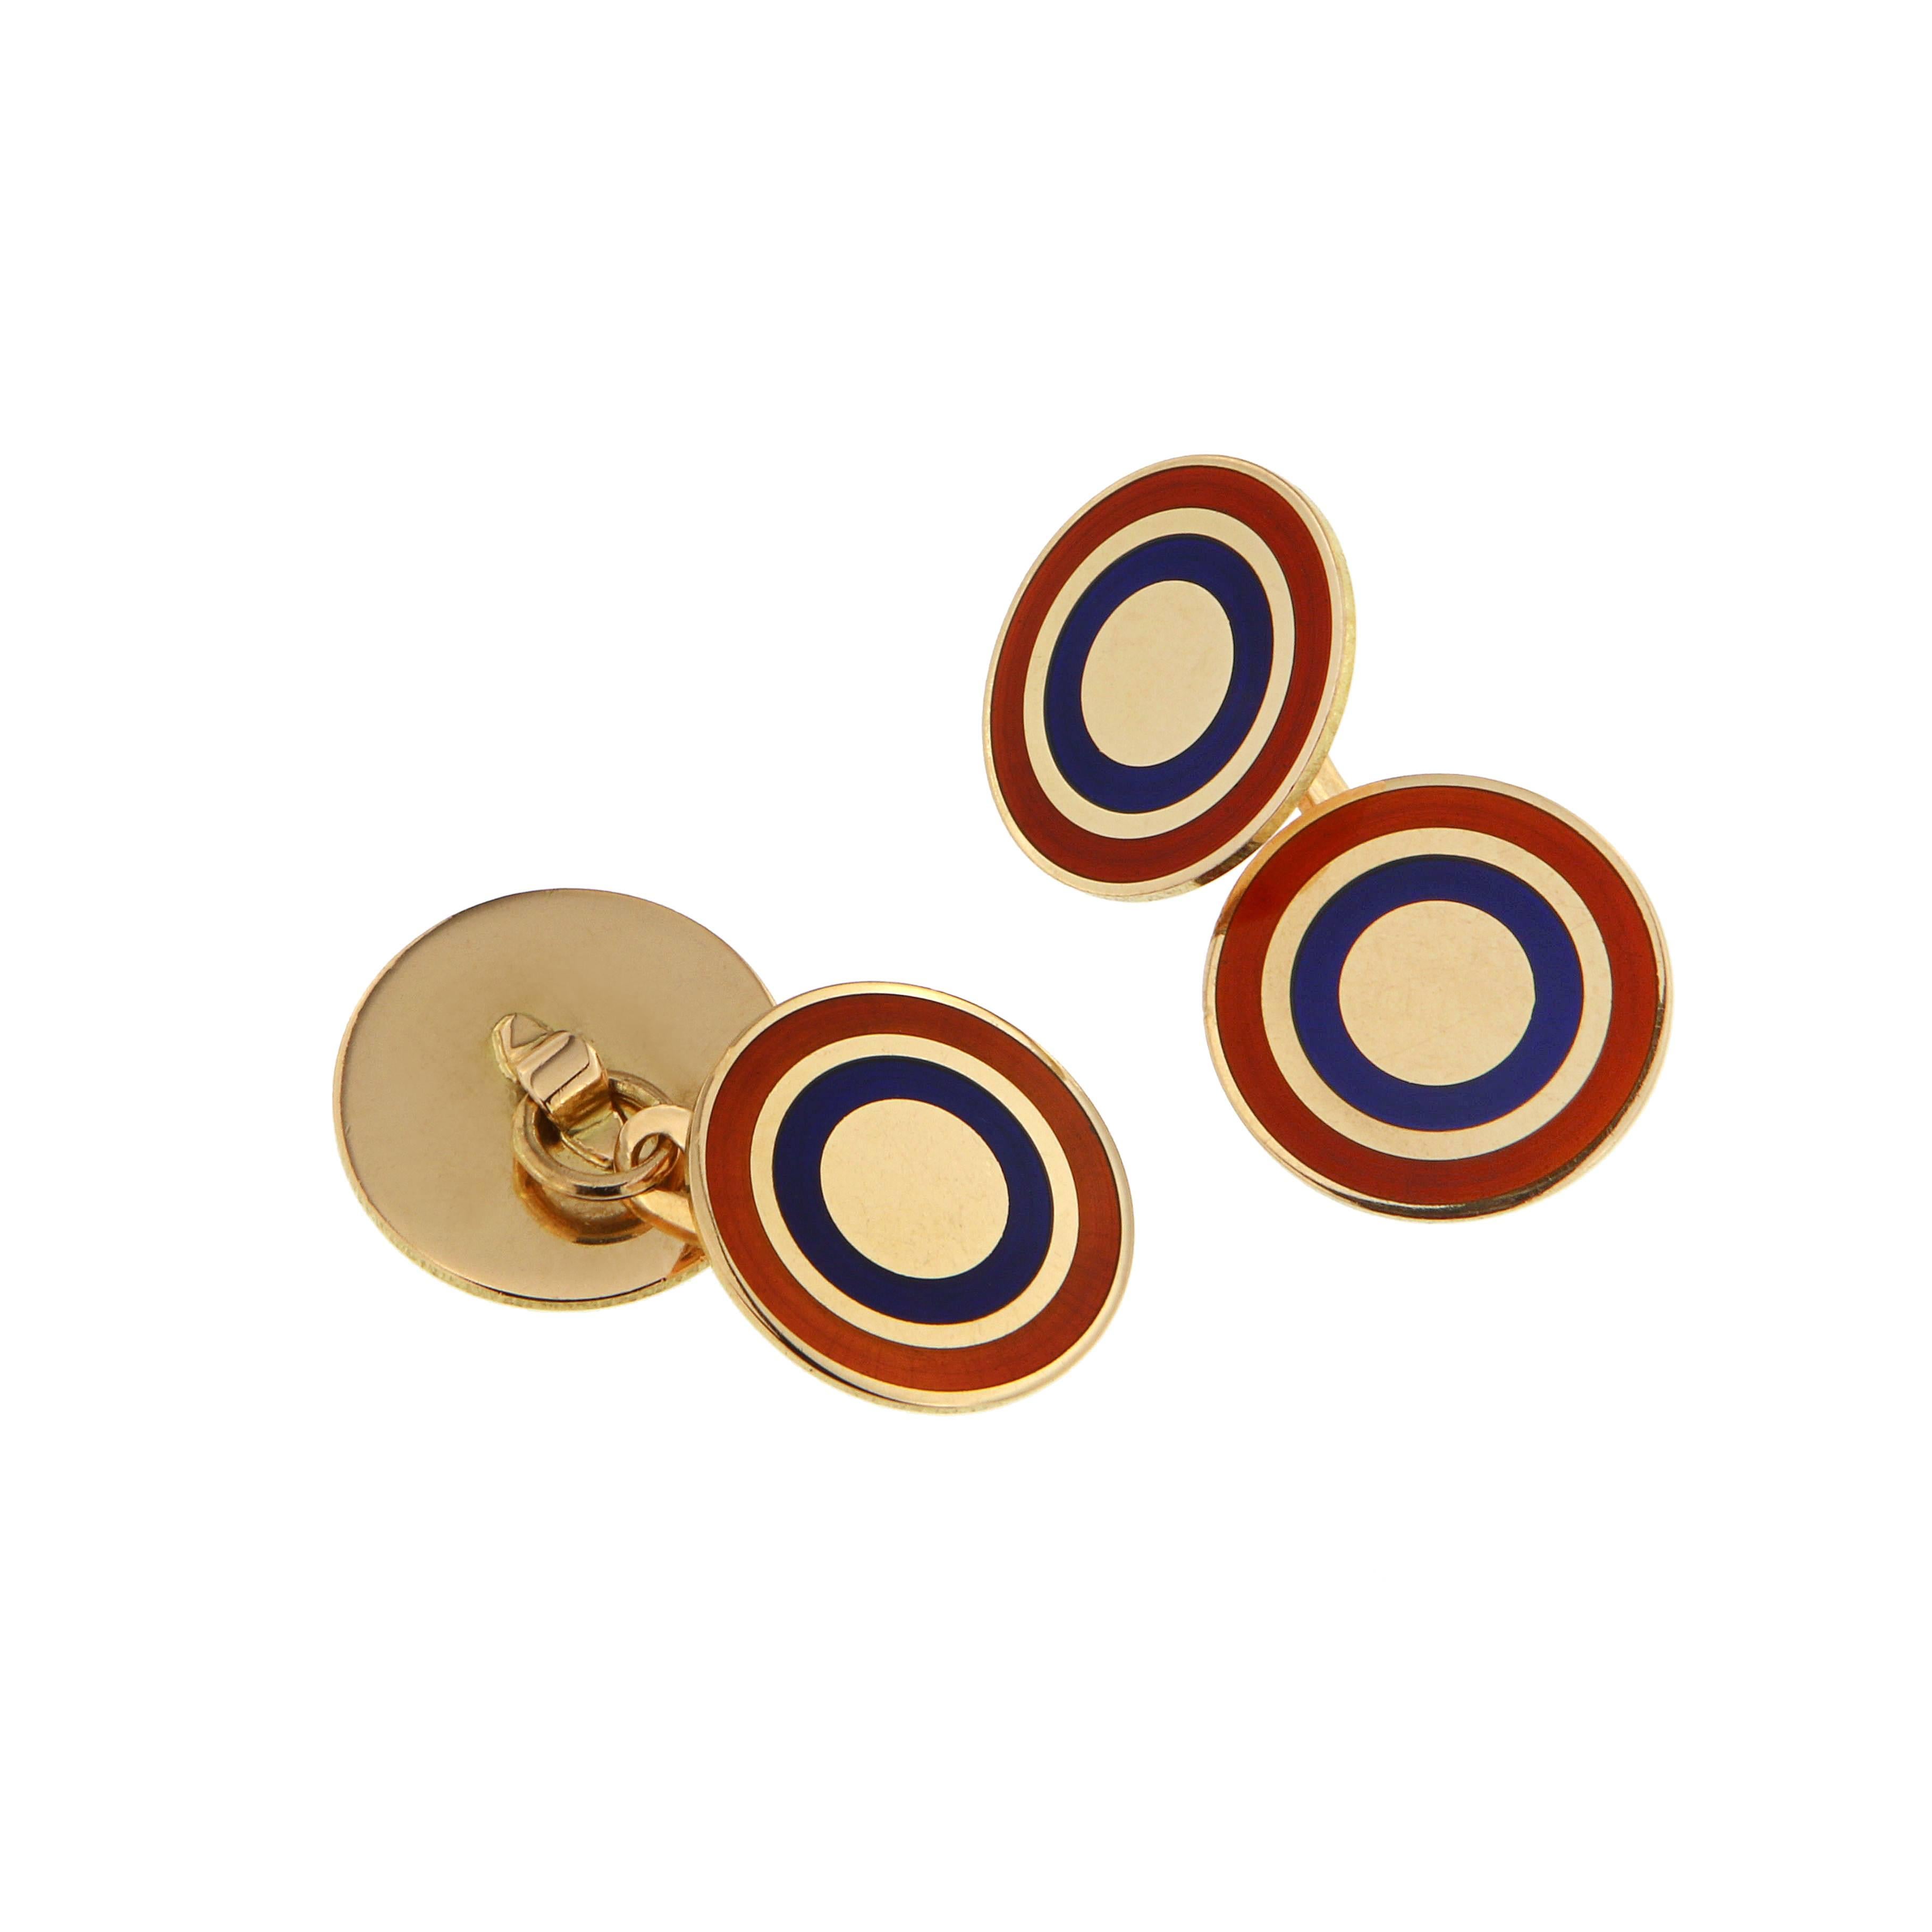 Round shaped enamel cufflinks with connection

The diameter is 15 mm

Italian marked 750 and 55VA